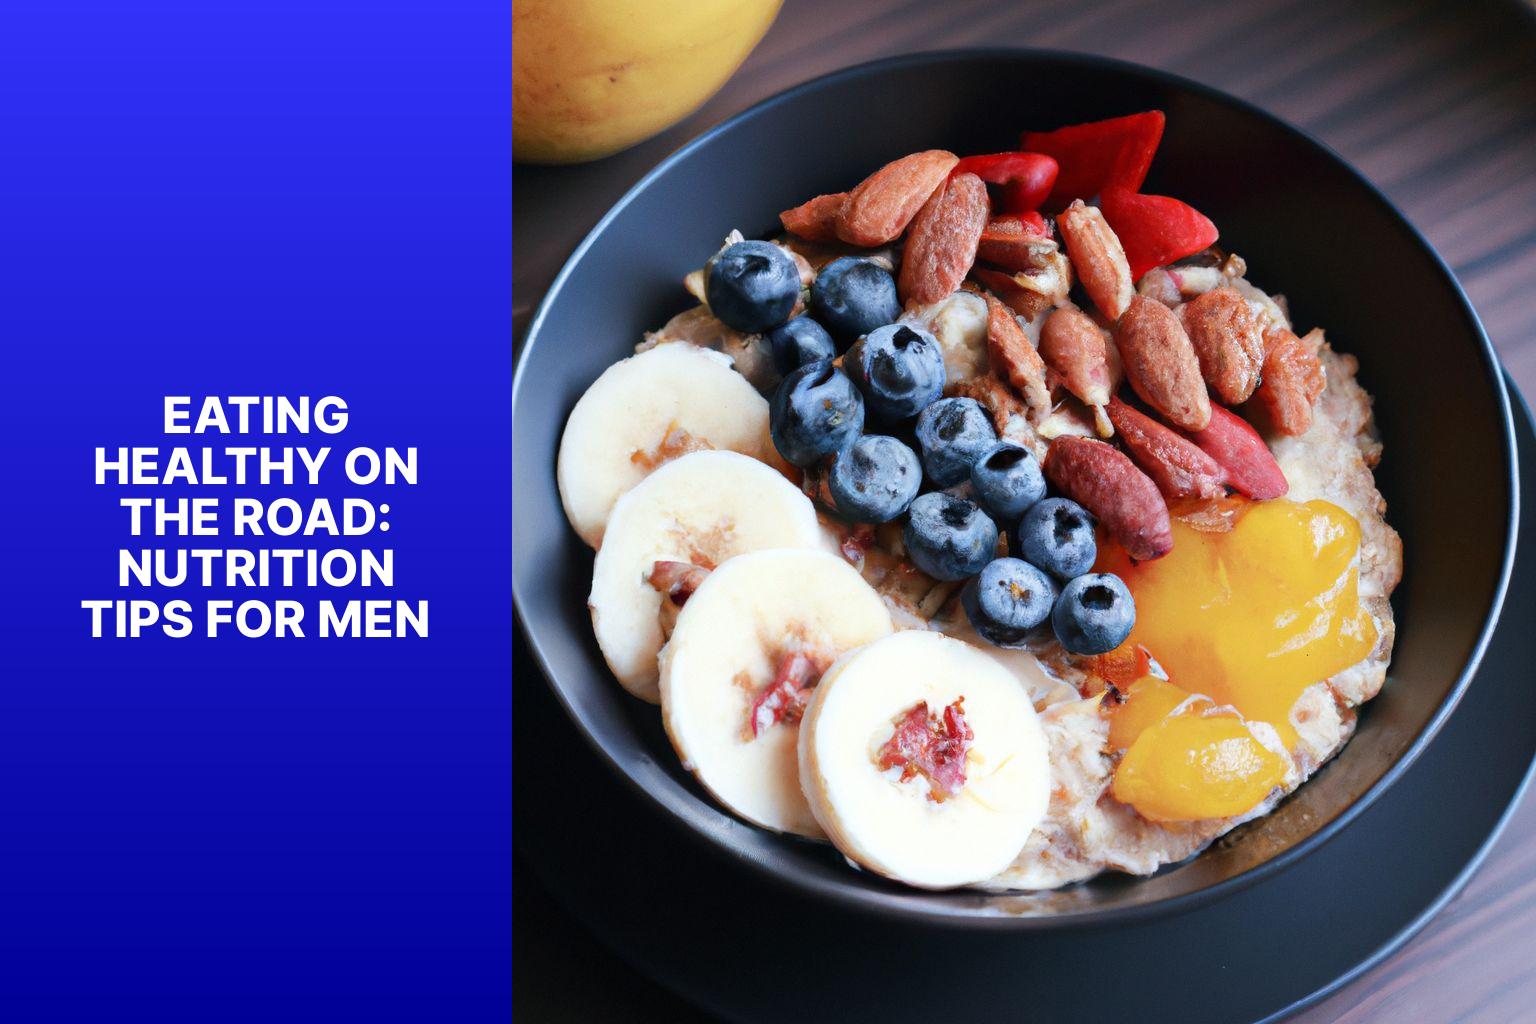 Eating Healthy on the Road: Nutrition Tips for Men - Staying Fit While Traveling: Men